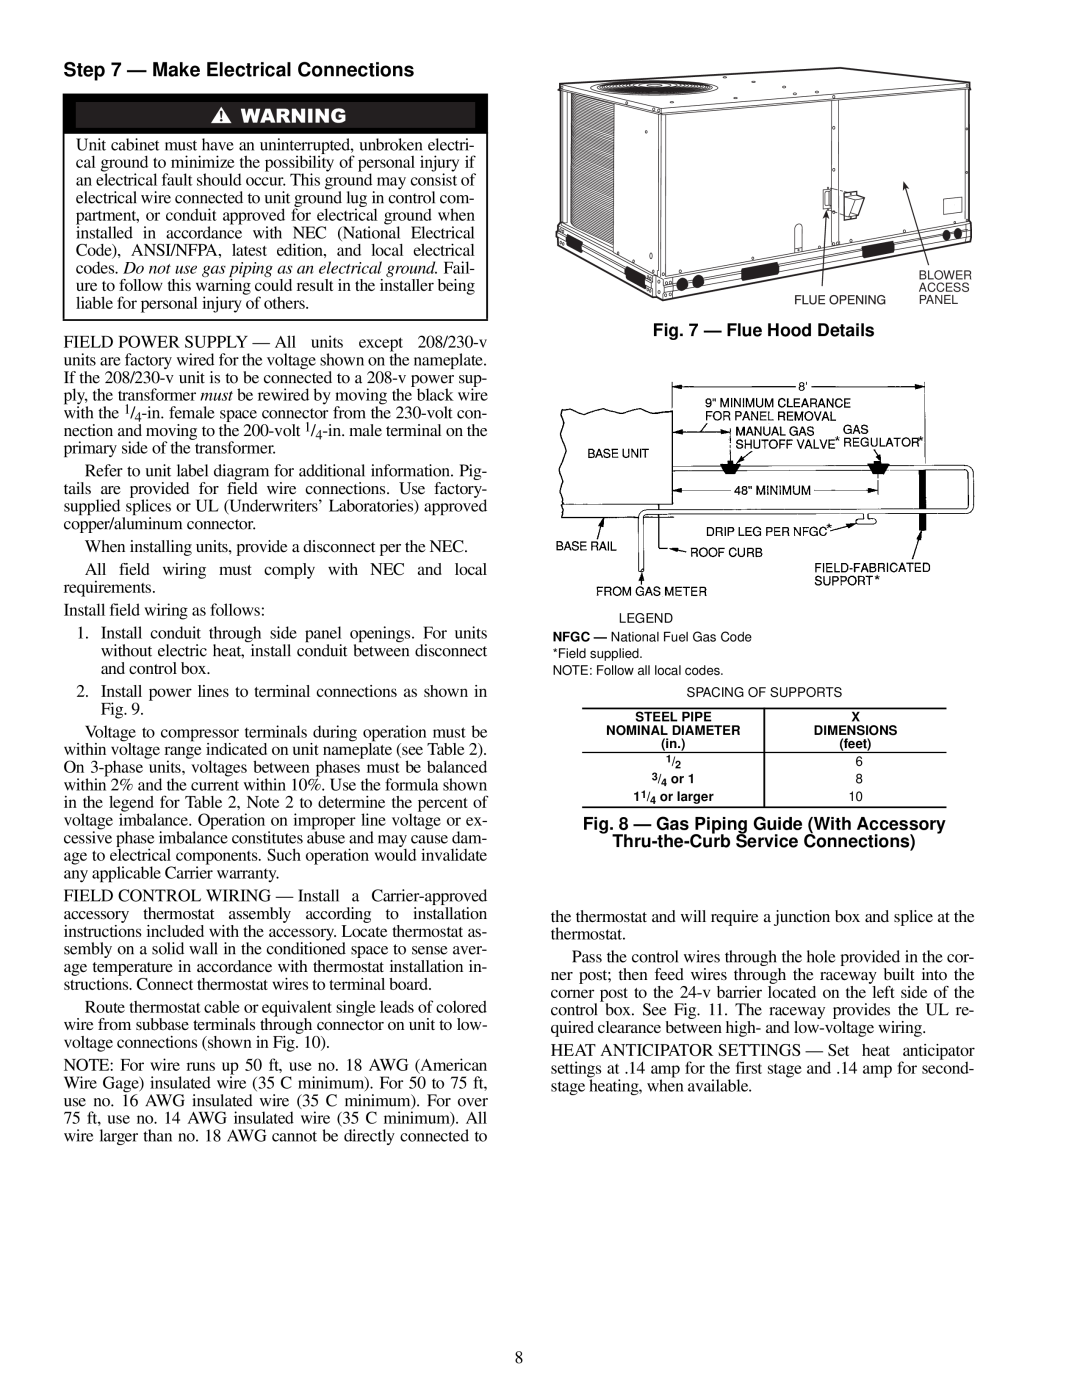 Carrier 48TF004-007 specifications Make Electrical Connections, Flue Hood Details 